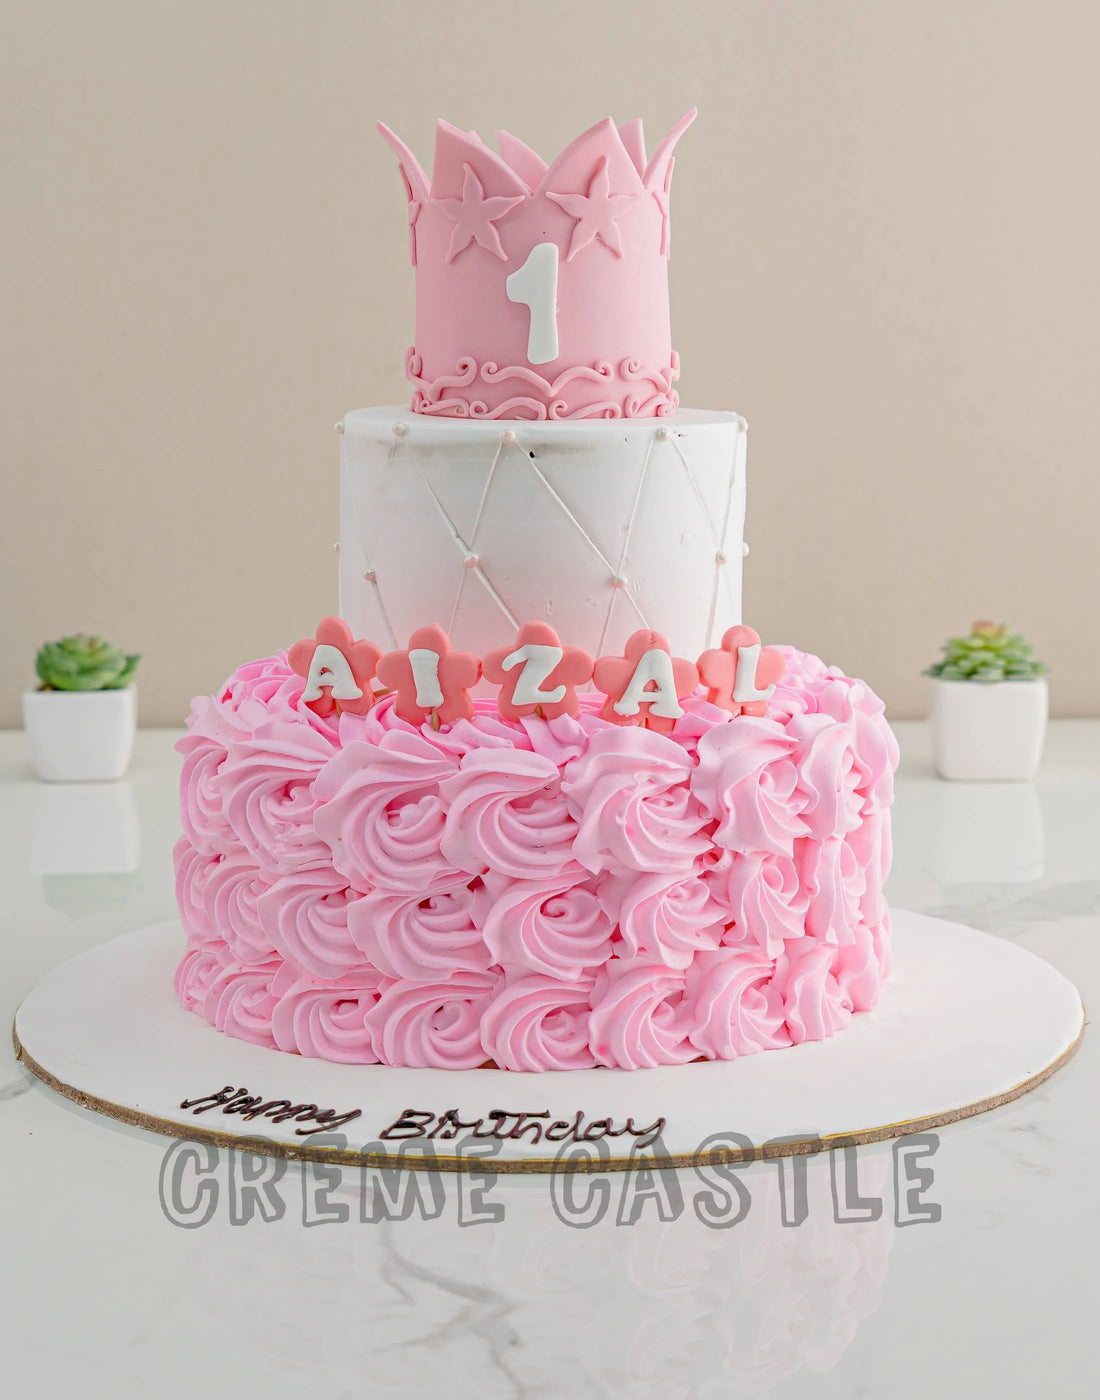 1st Birthday Cake for Girl with Tiara by Creme Castle